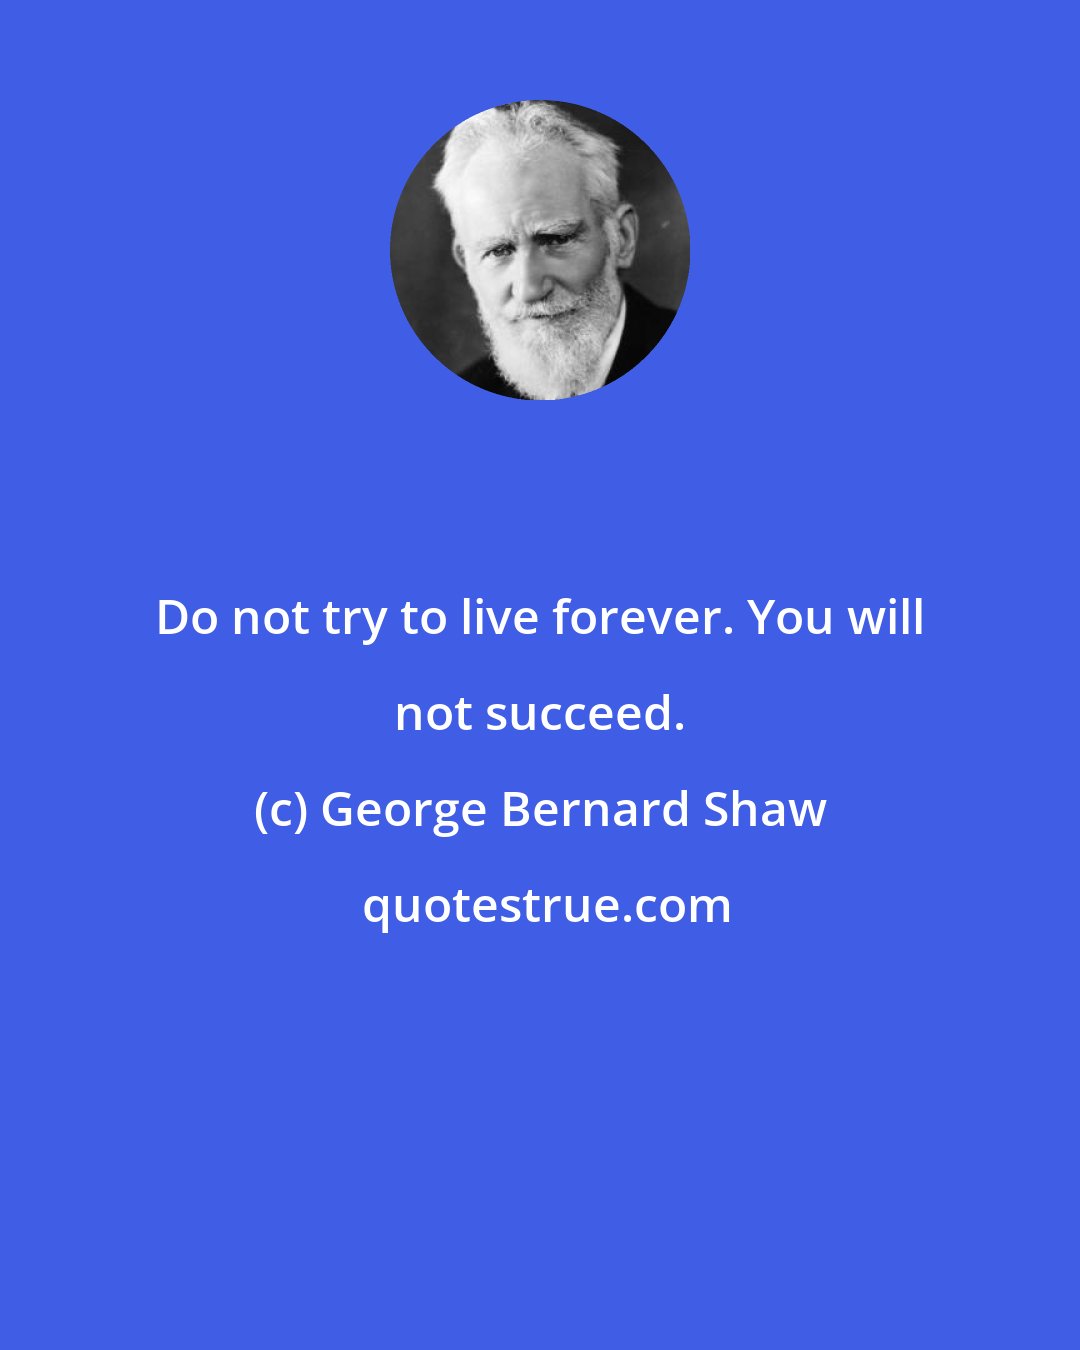 George Bernard Shaw: Do not try to live forever. You will not succeed.